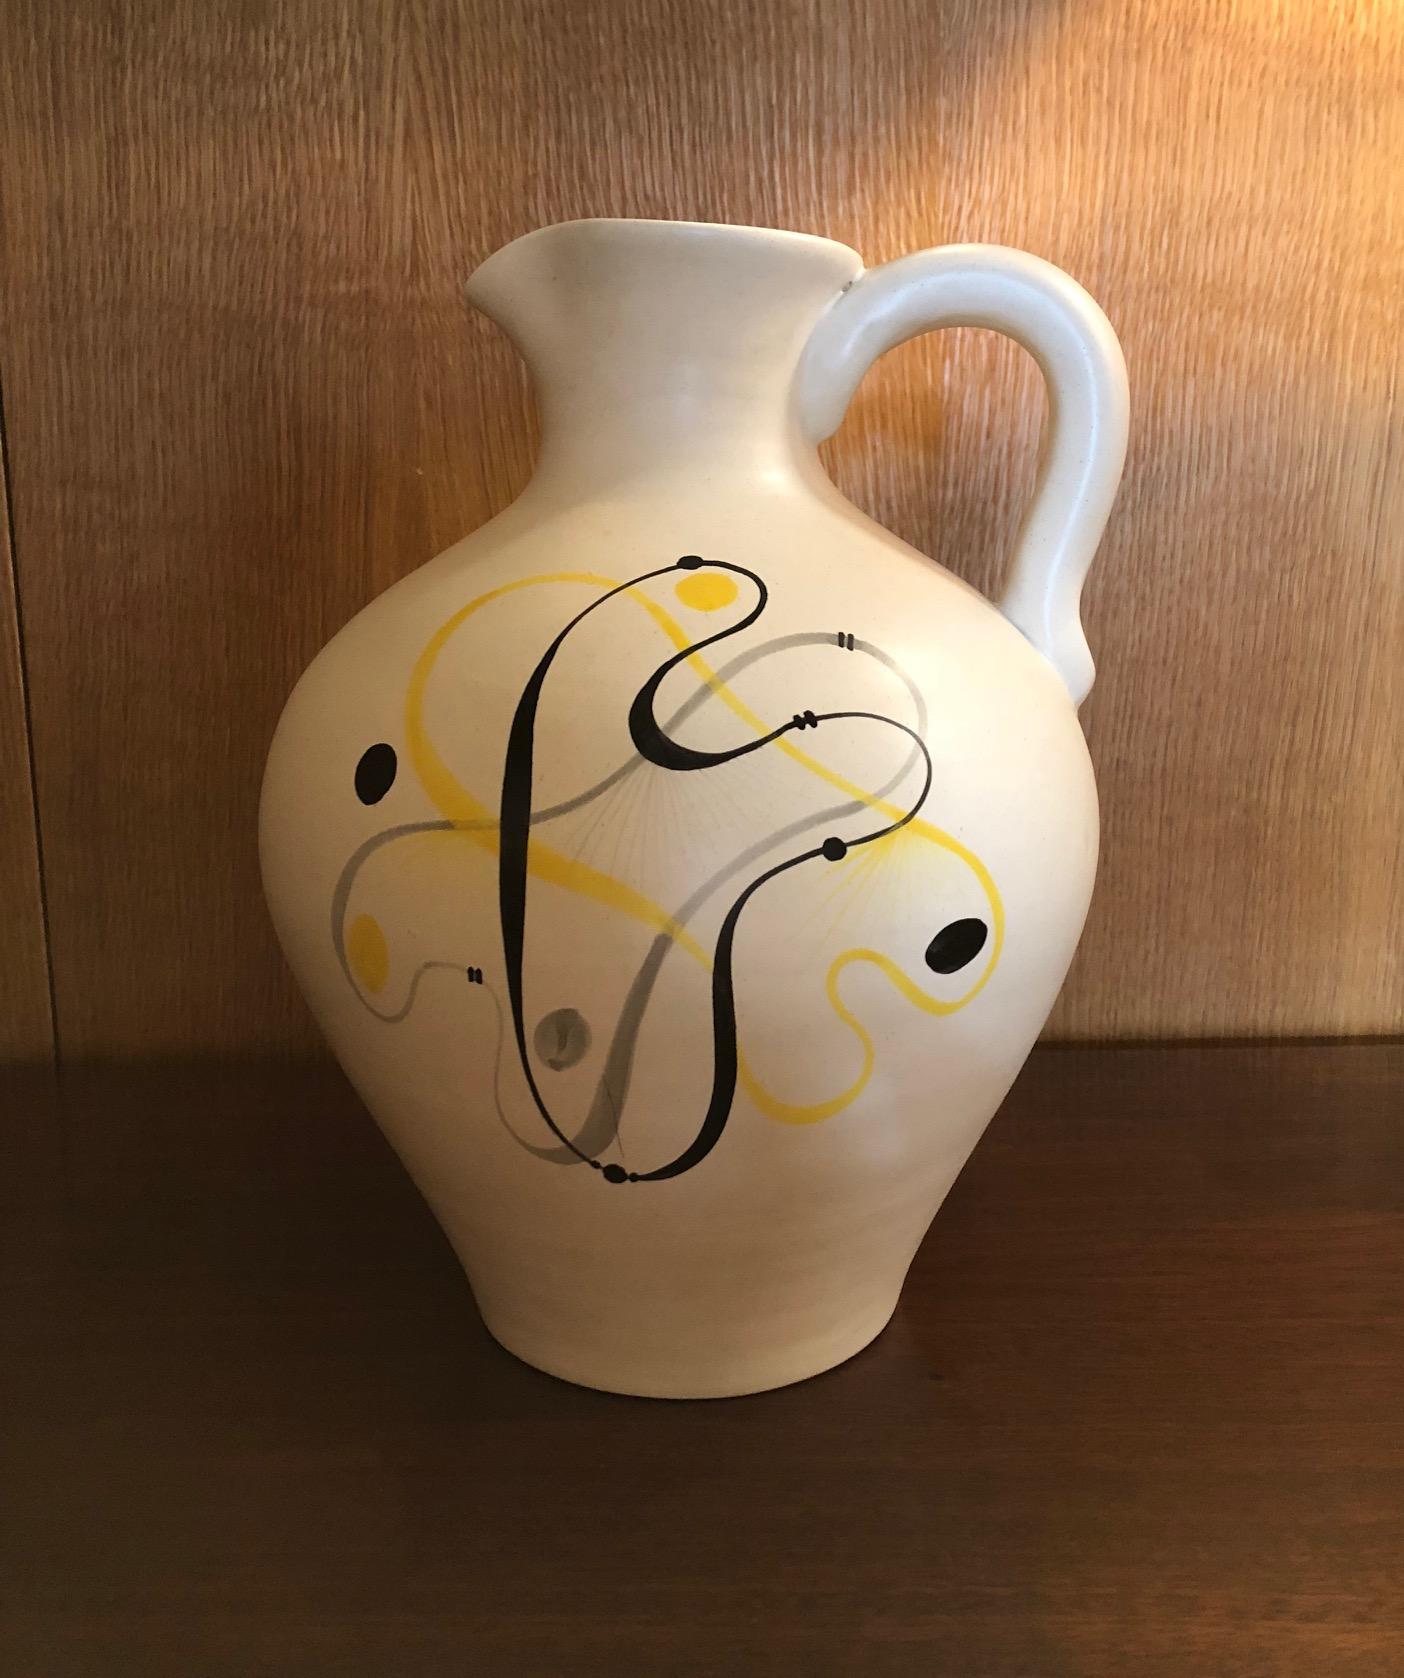 Abstract ceramic jug by André Baud, Vallauris, France, 1950s.